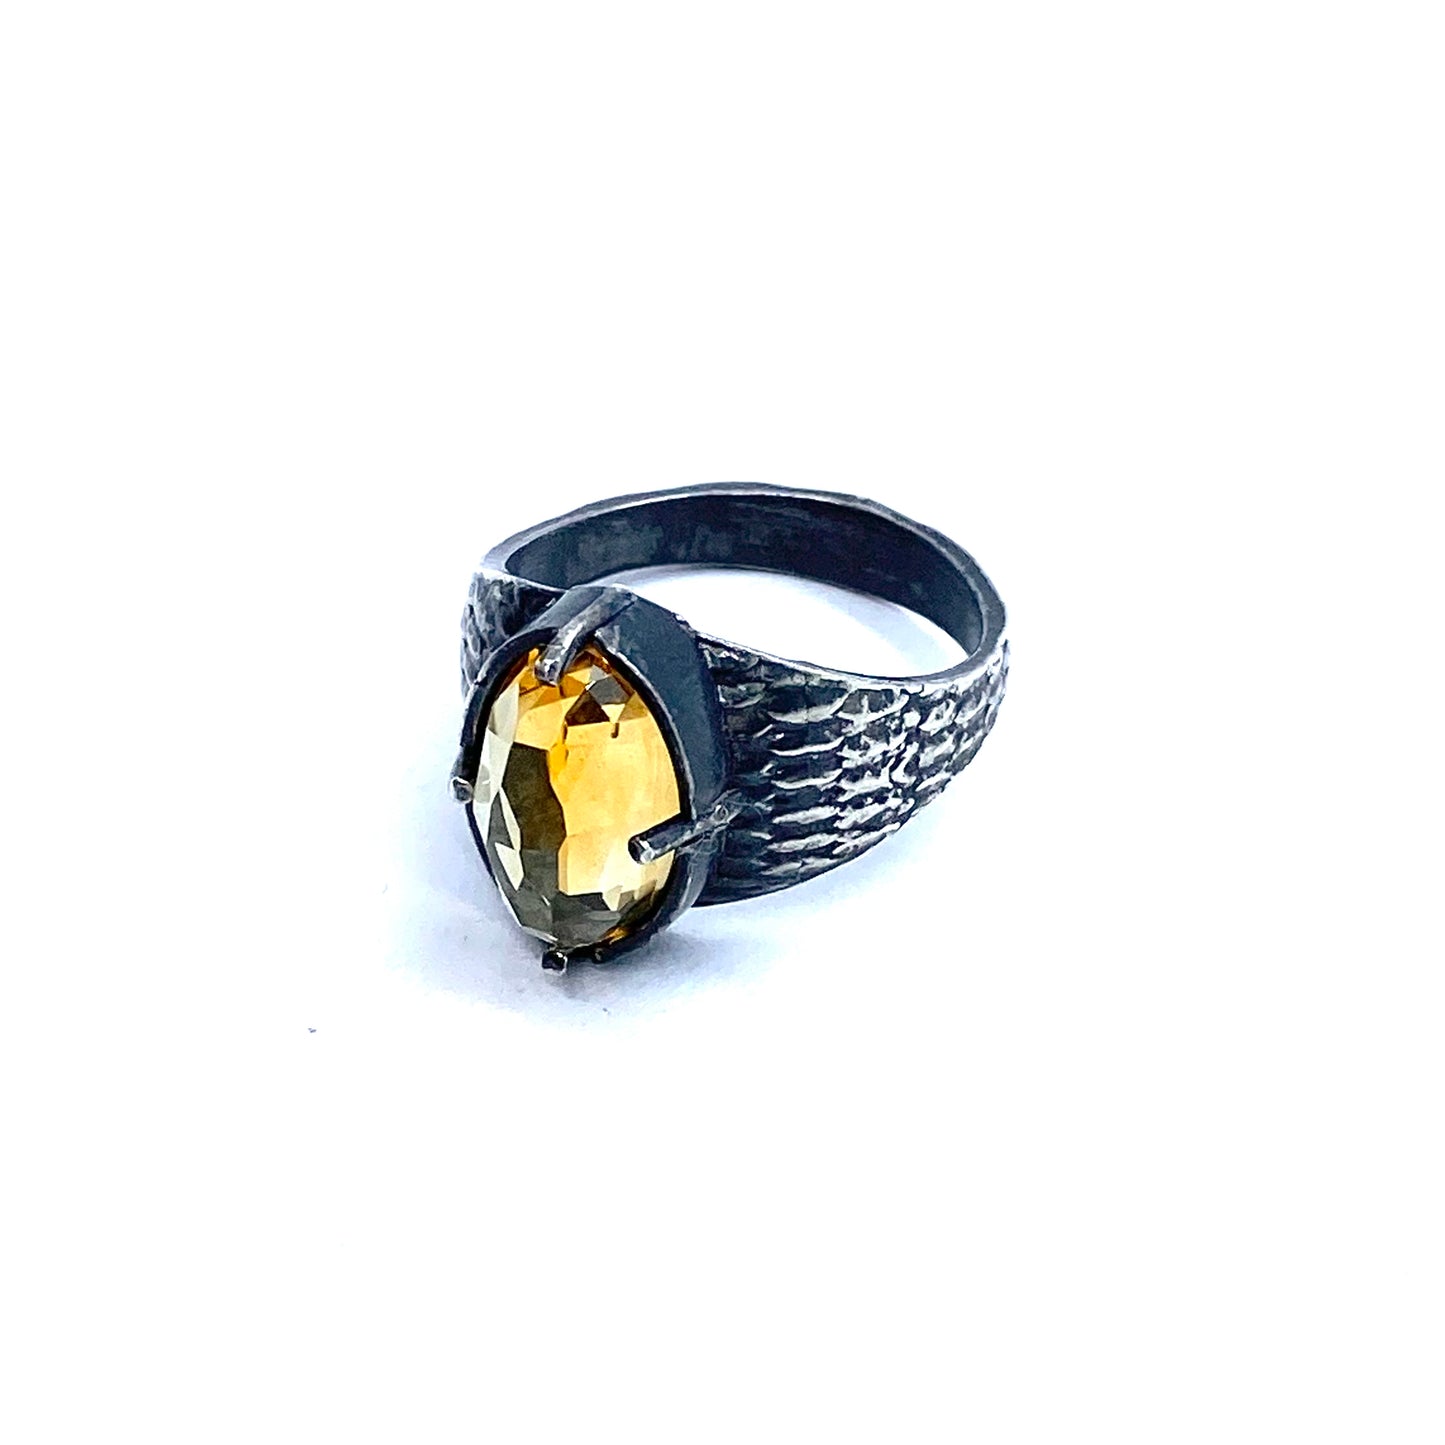 Serpent’s Eye with Citrine in Sterling Silver